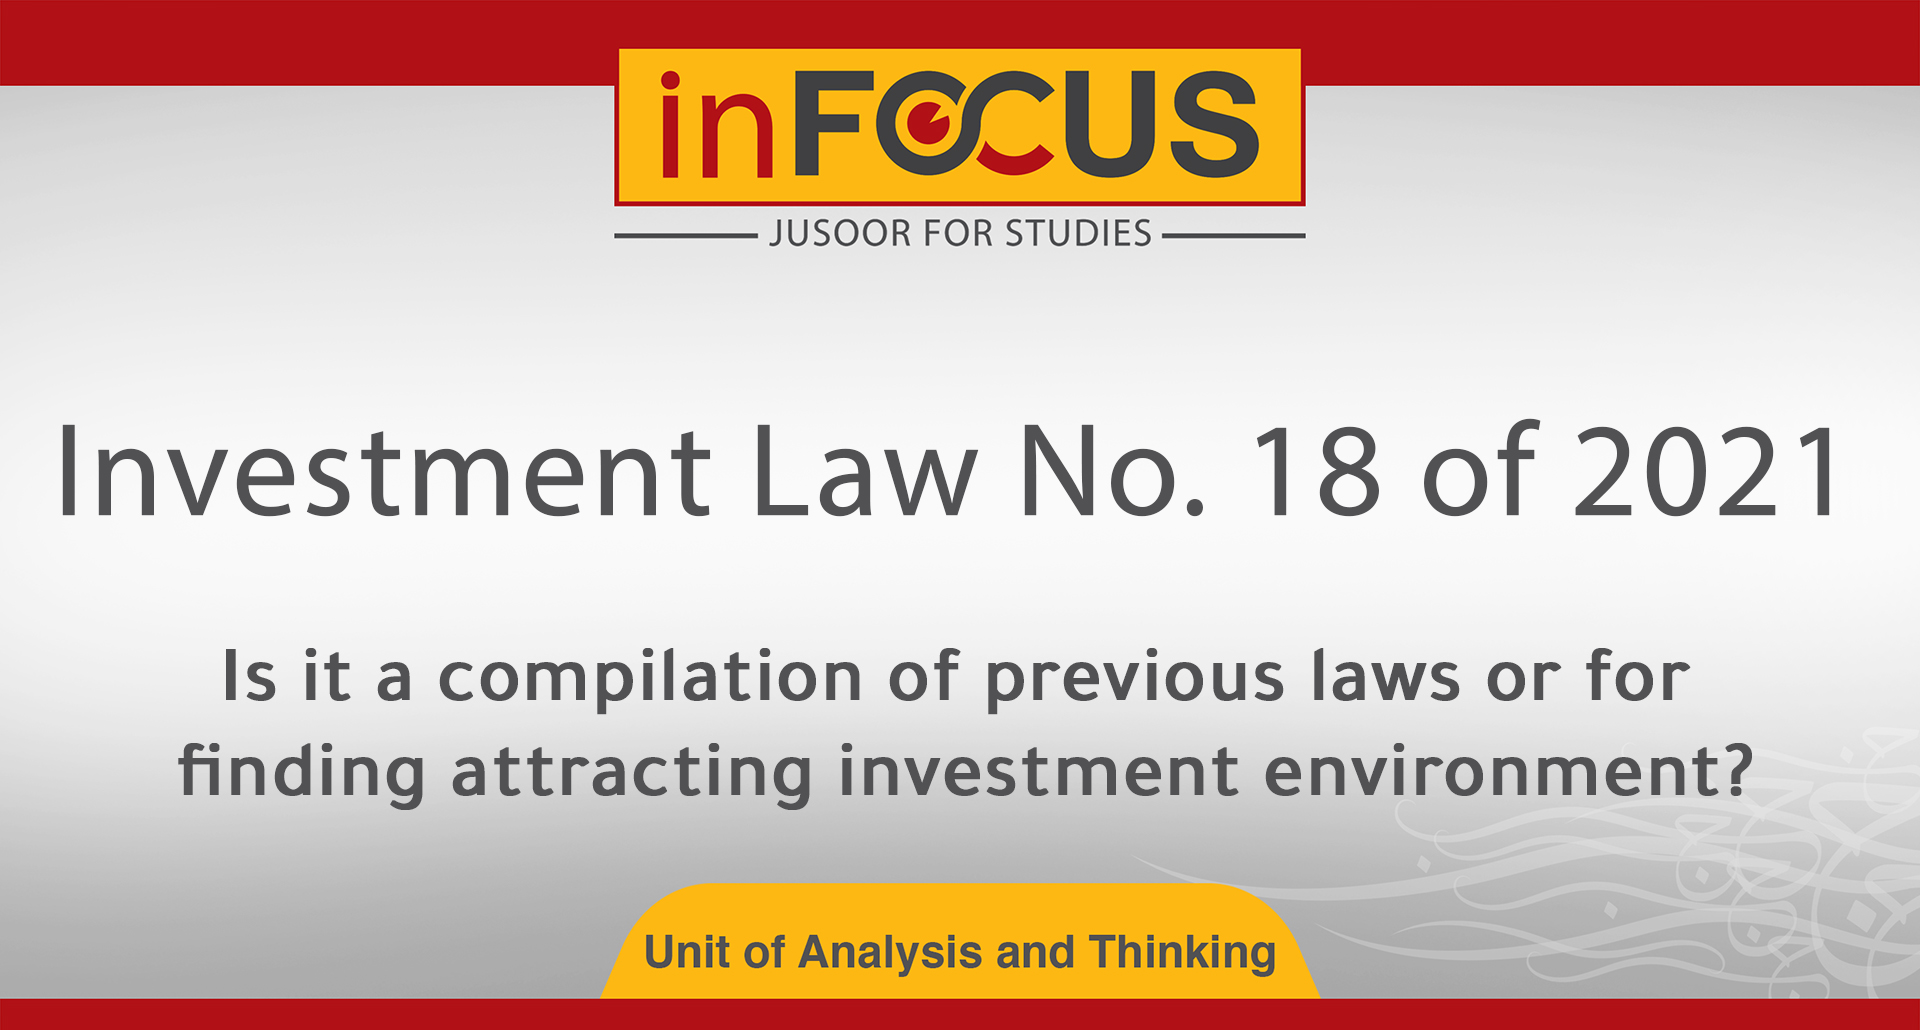 Investment Law No. 18 of 2021: Is it a compilation of previous laws or for finding attracting investment environment?